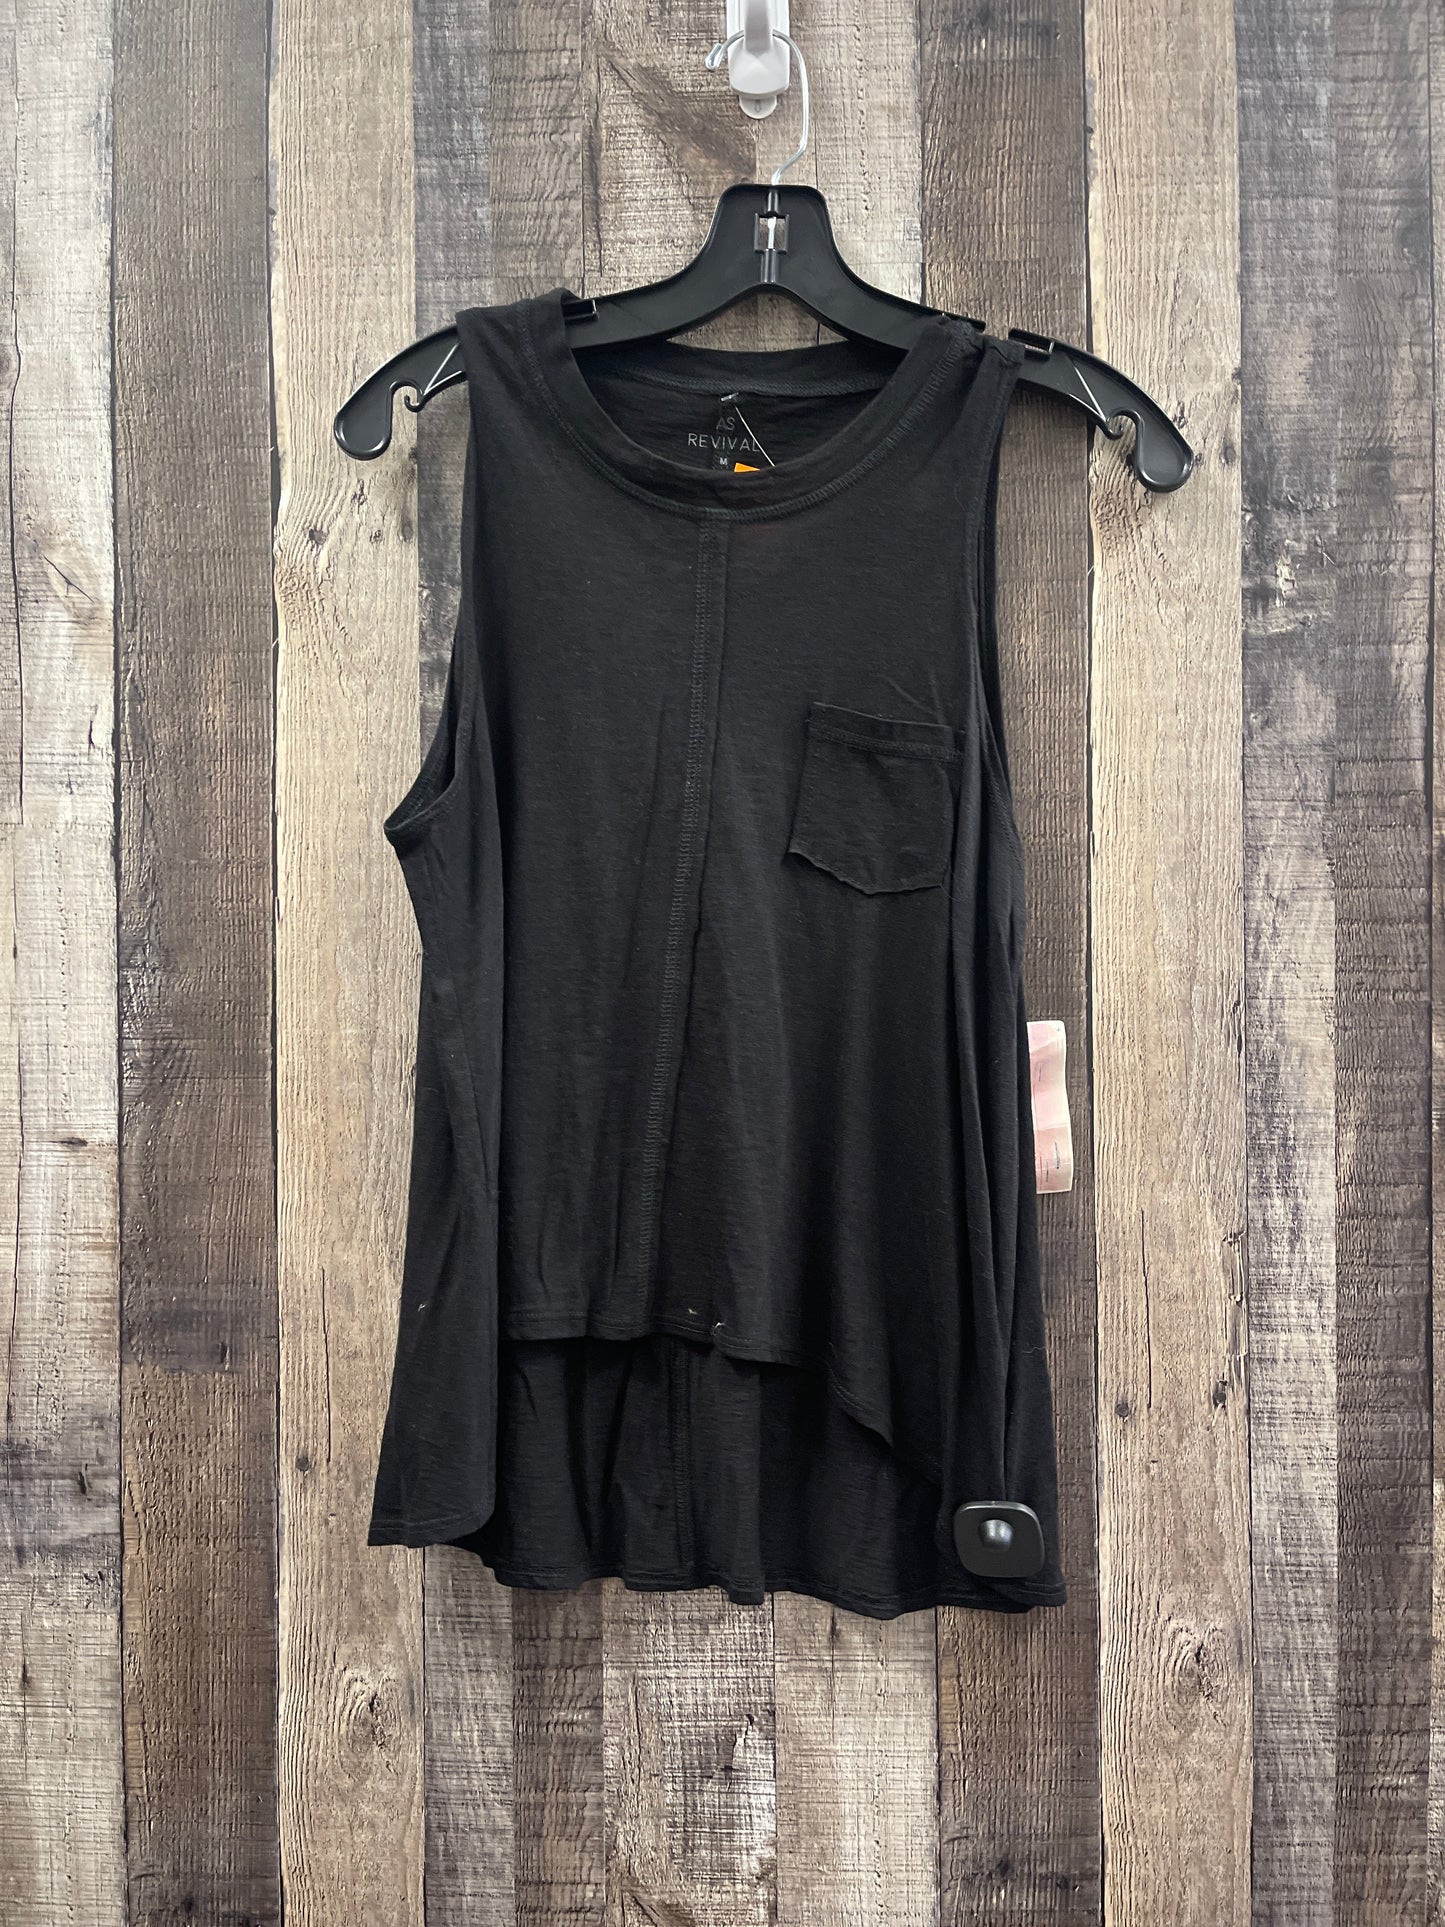 Top Sleeveless By Cme  Size: M